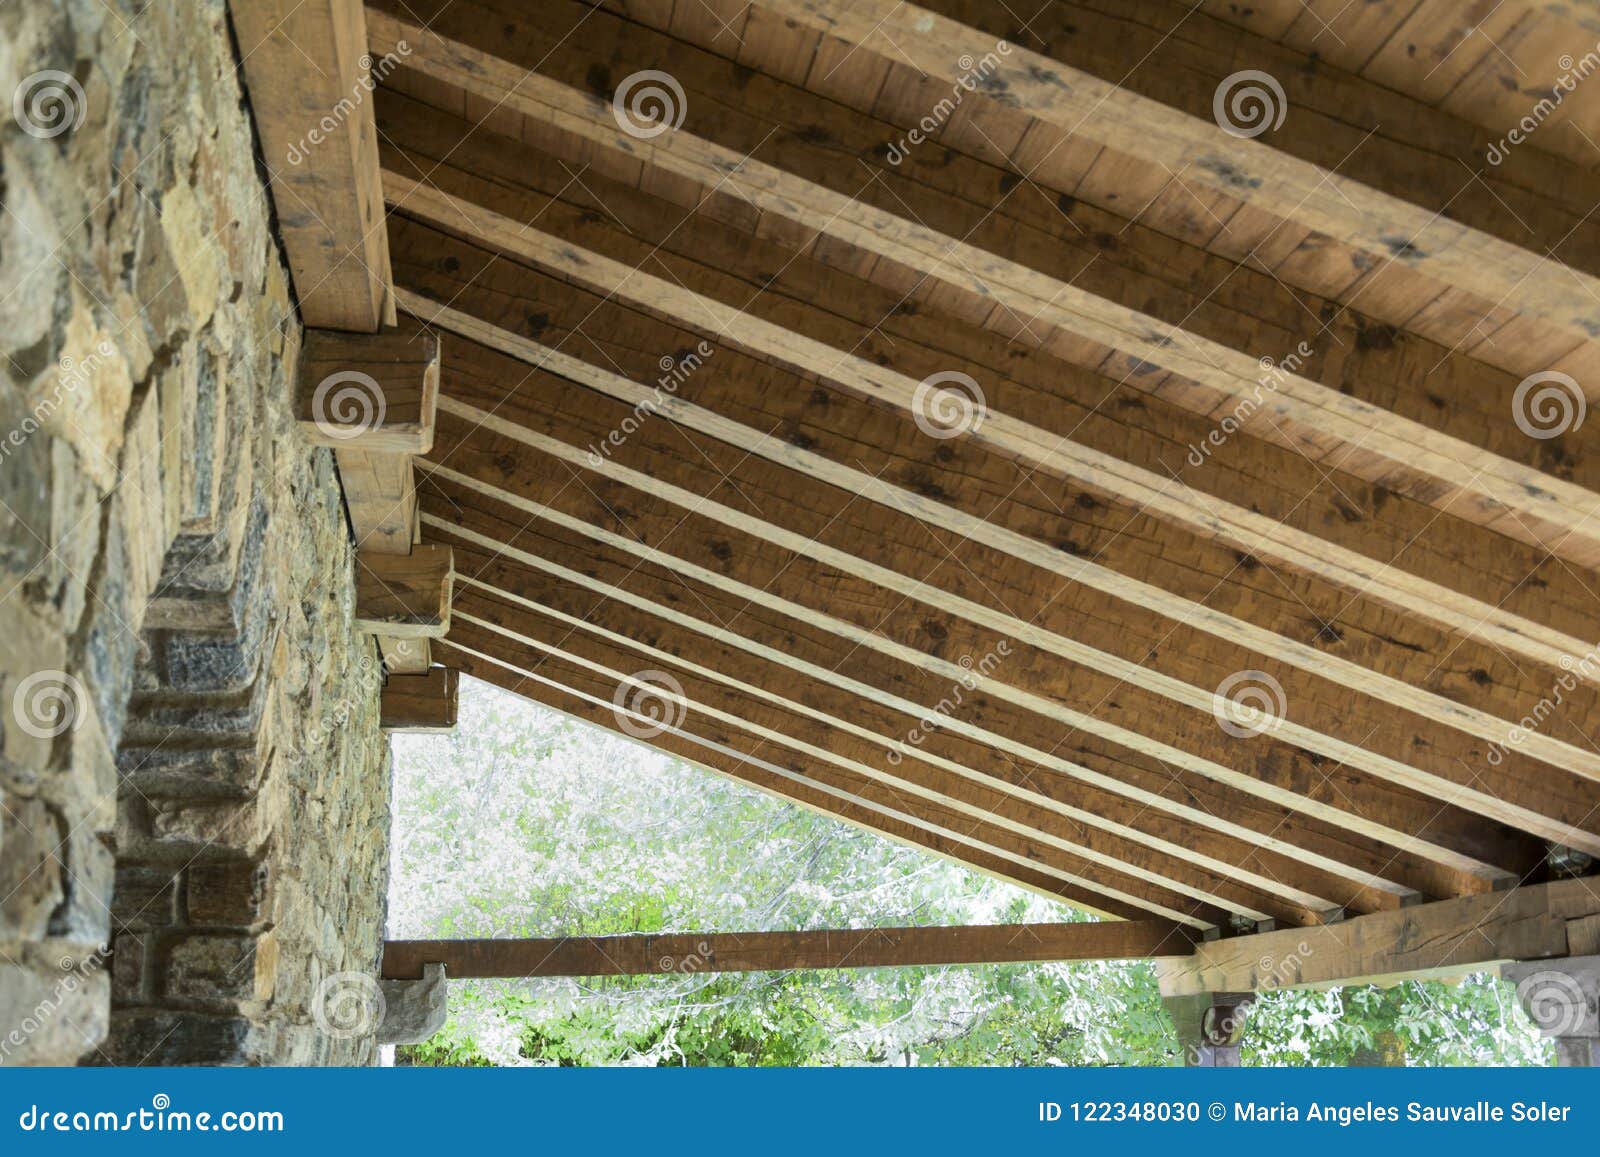 Rustic Wooden Ceiling Stock Photo Image Of Ceiling 122348030